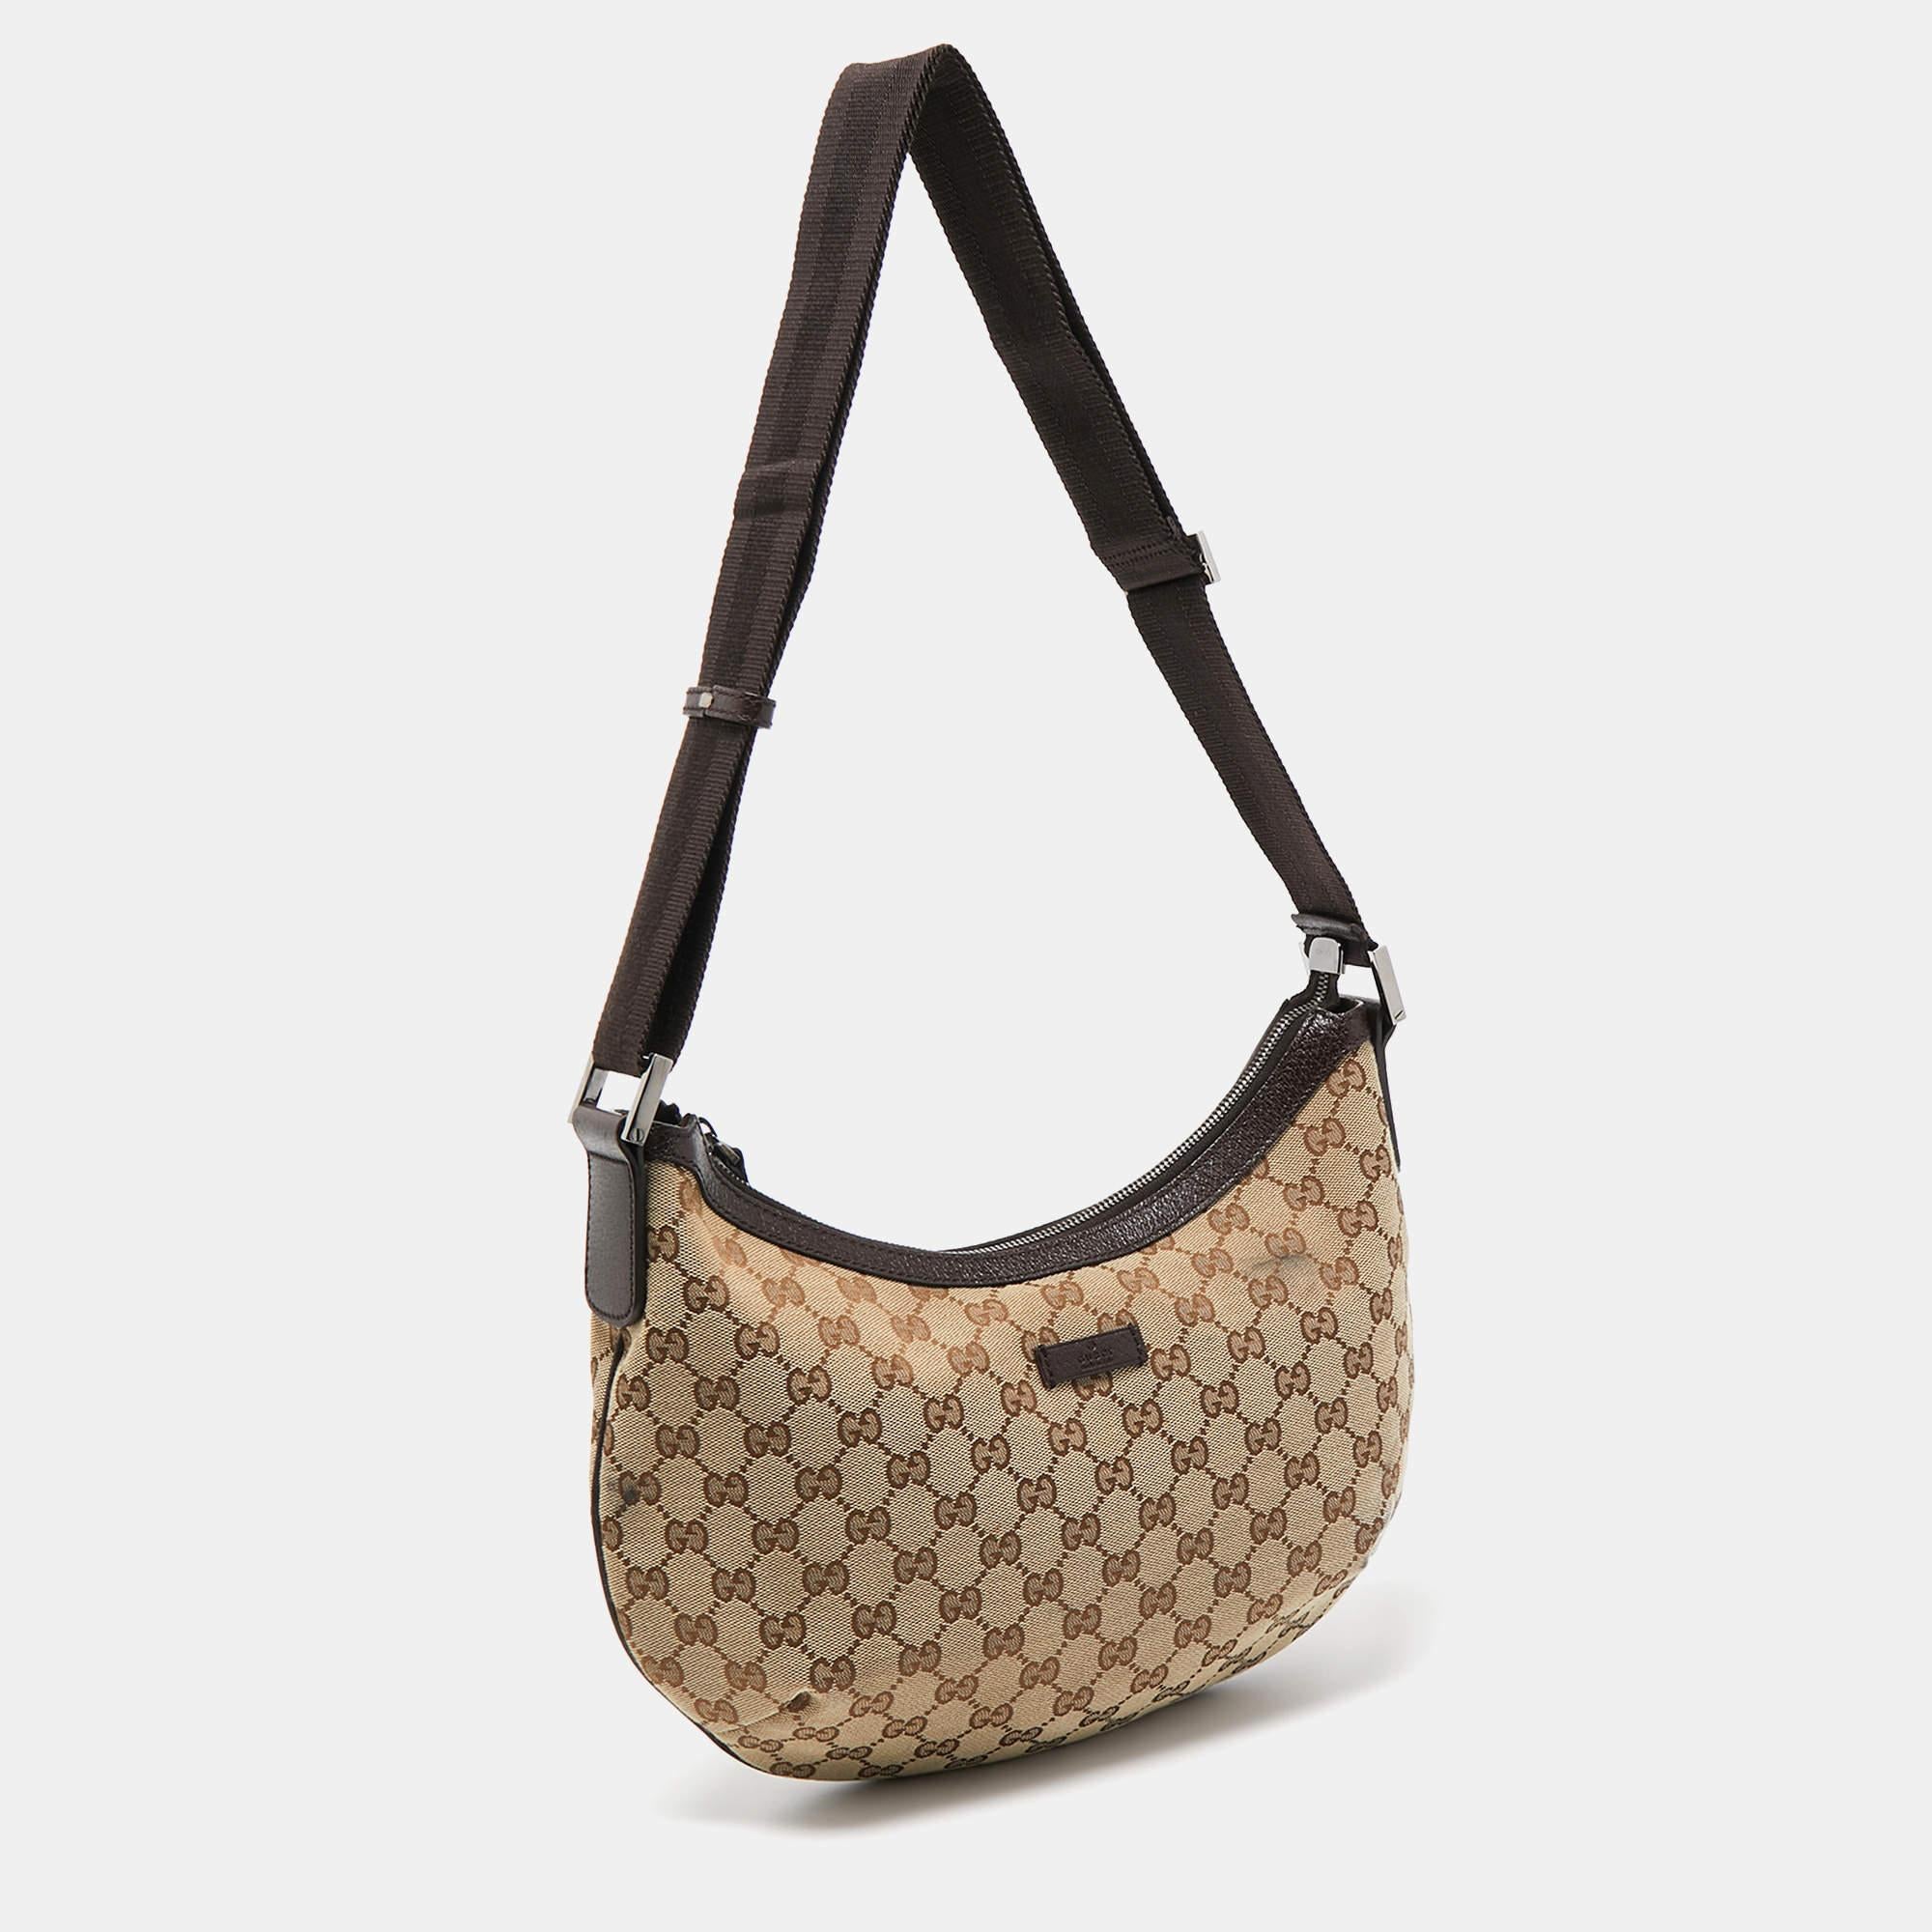 Indulge in timeless luxury with this Gucci GG canvas bag for women. Meticulously crafted, this exquisite accessory embodies elegance, functionality, and style, making it the ultimate companion for every sophisticated woman.

